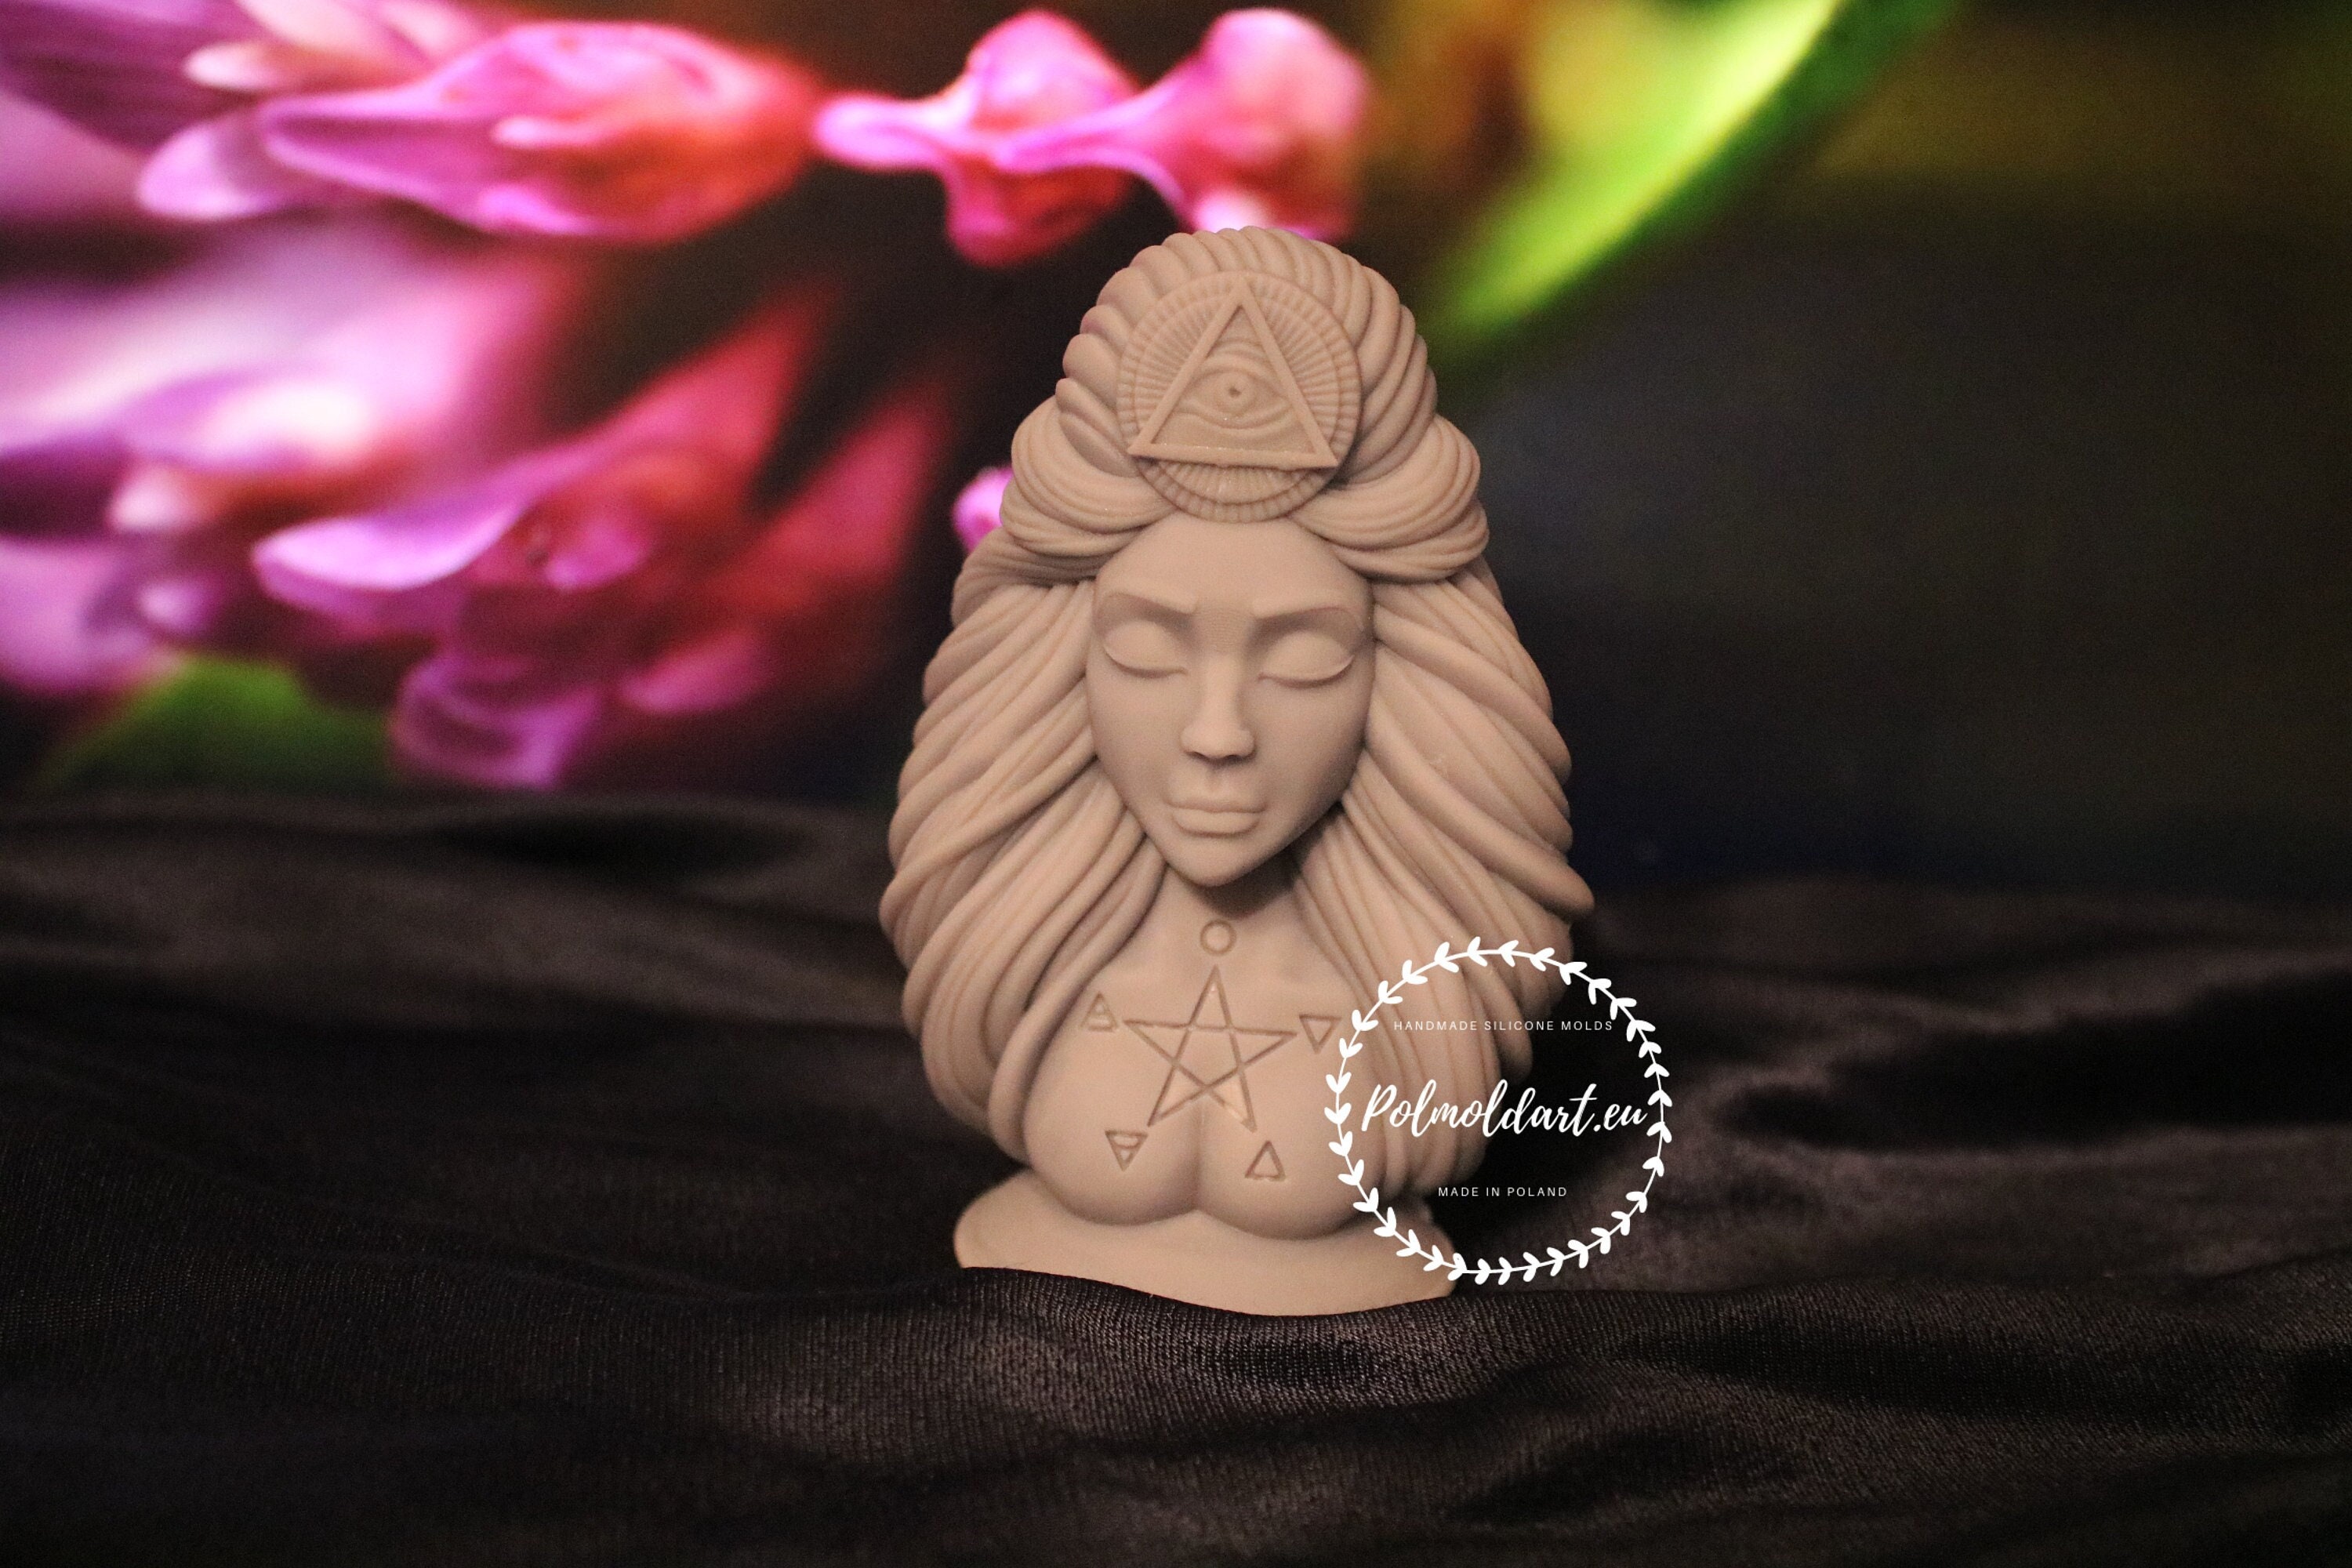 Flexible FG Silicone Press Mold of a Doll Face Cab witch, hag Witch Face Mold #0086 